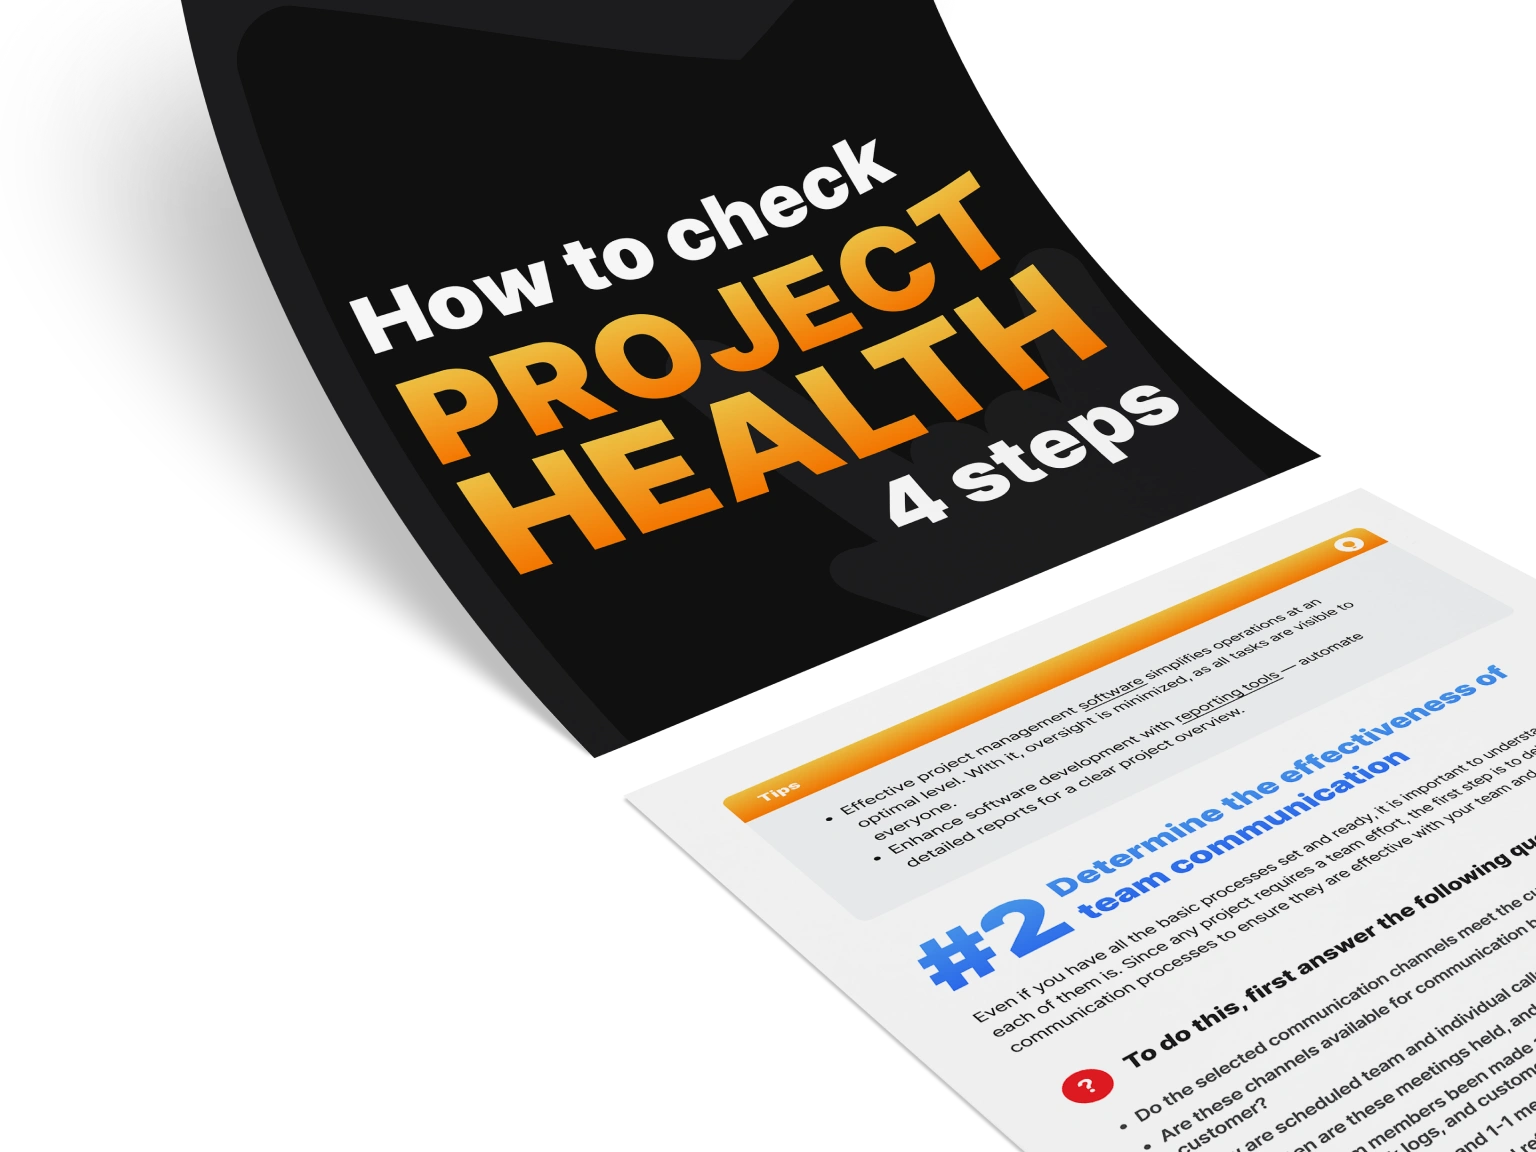 How to check project